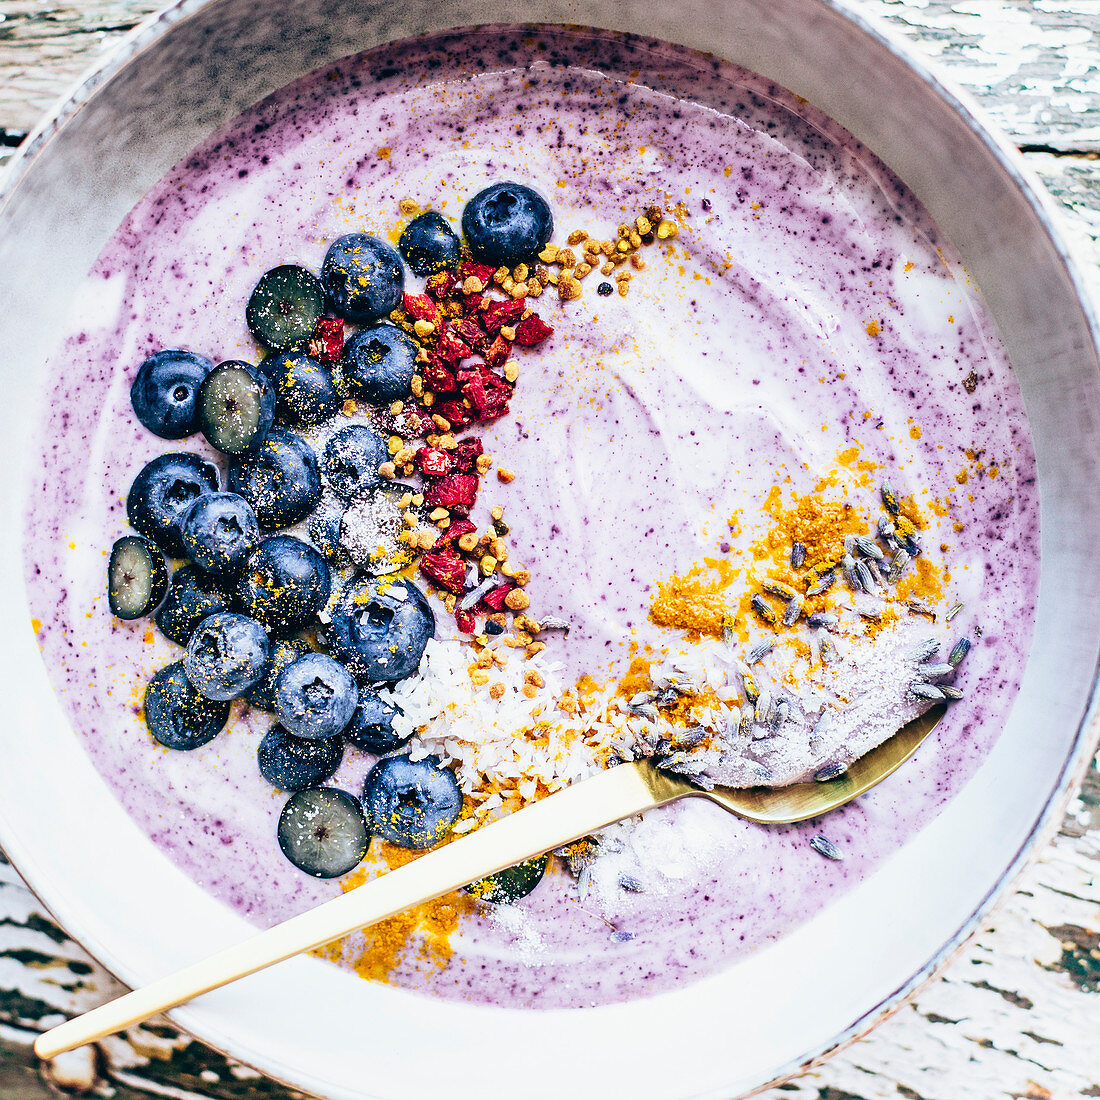 A smoothie bowl with blueberries